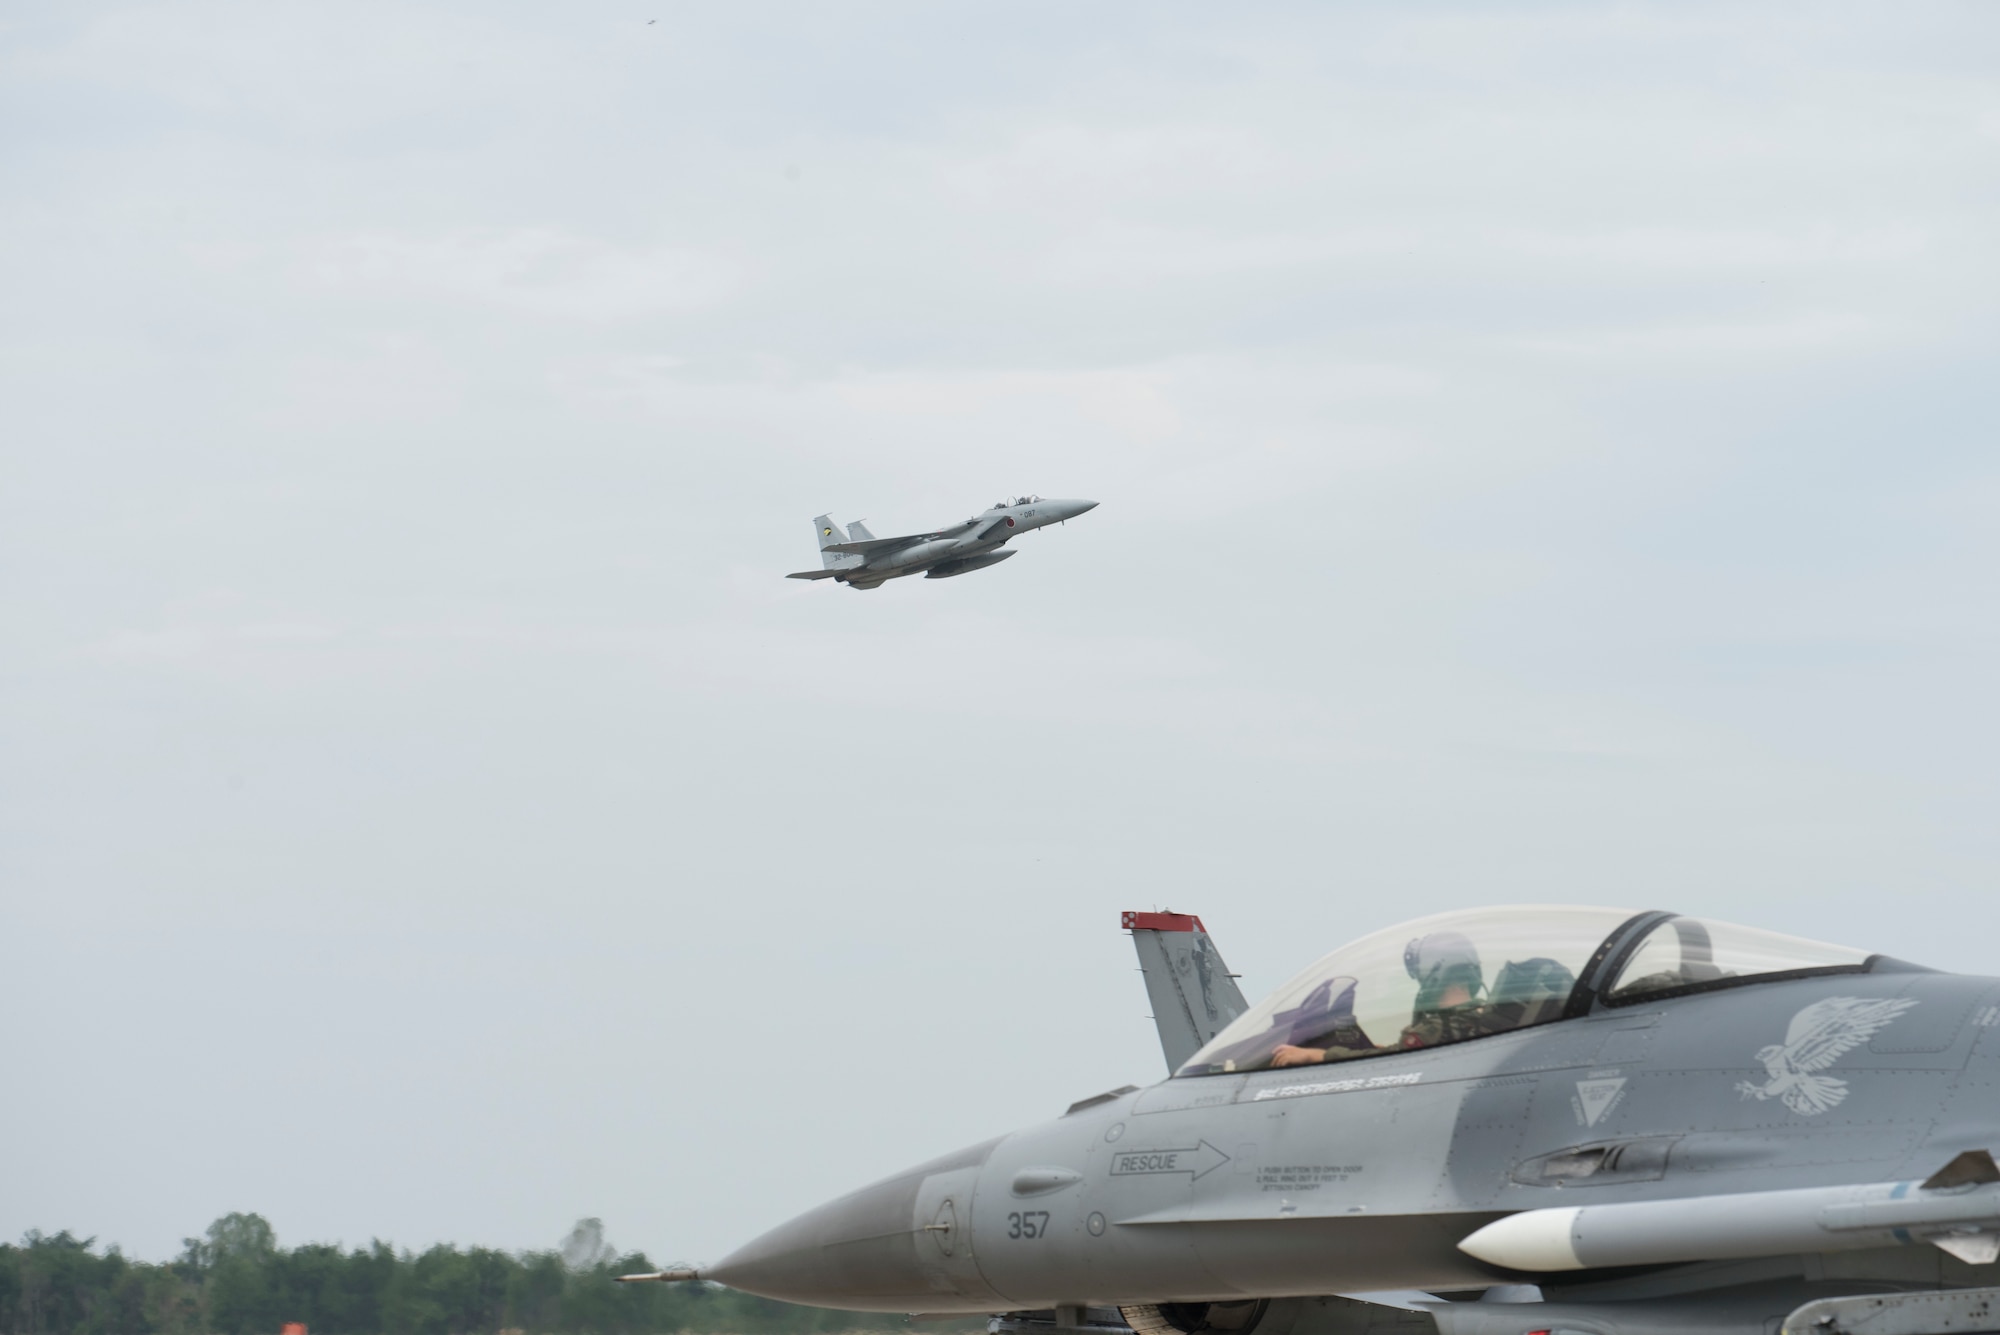 A Mitsubishi F-15J flies above a taxiing F-16 Fighting Falcon during an aviation training relocation at Komatsu Air Base, Japan, Oct. 2, 2019. The 28 stories executed during the ATR gave Wild Weasel’s the ability to learn, train and integrate with their host nation partners while identifying successes and shortfalls. The F-15J is assigned to the 6th Air Wing Maintenance Squadron, Komatsu AB, and the F-16 is assigned to the 35th Maintenance Squadron from Misawa AB. (U.S. Air Force photo by Senior Airman Collette Brooks)